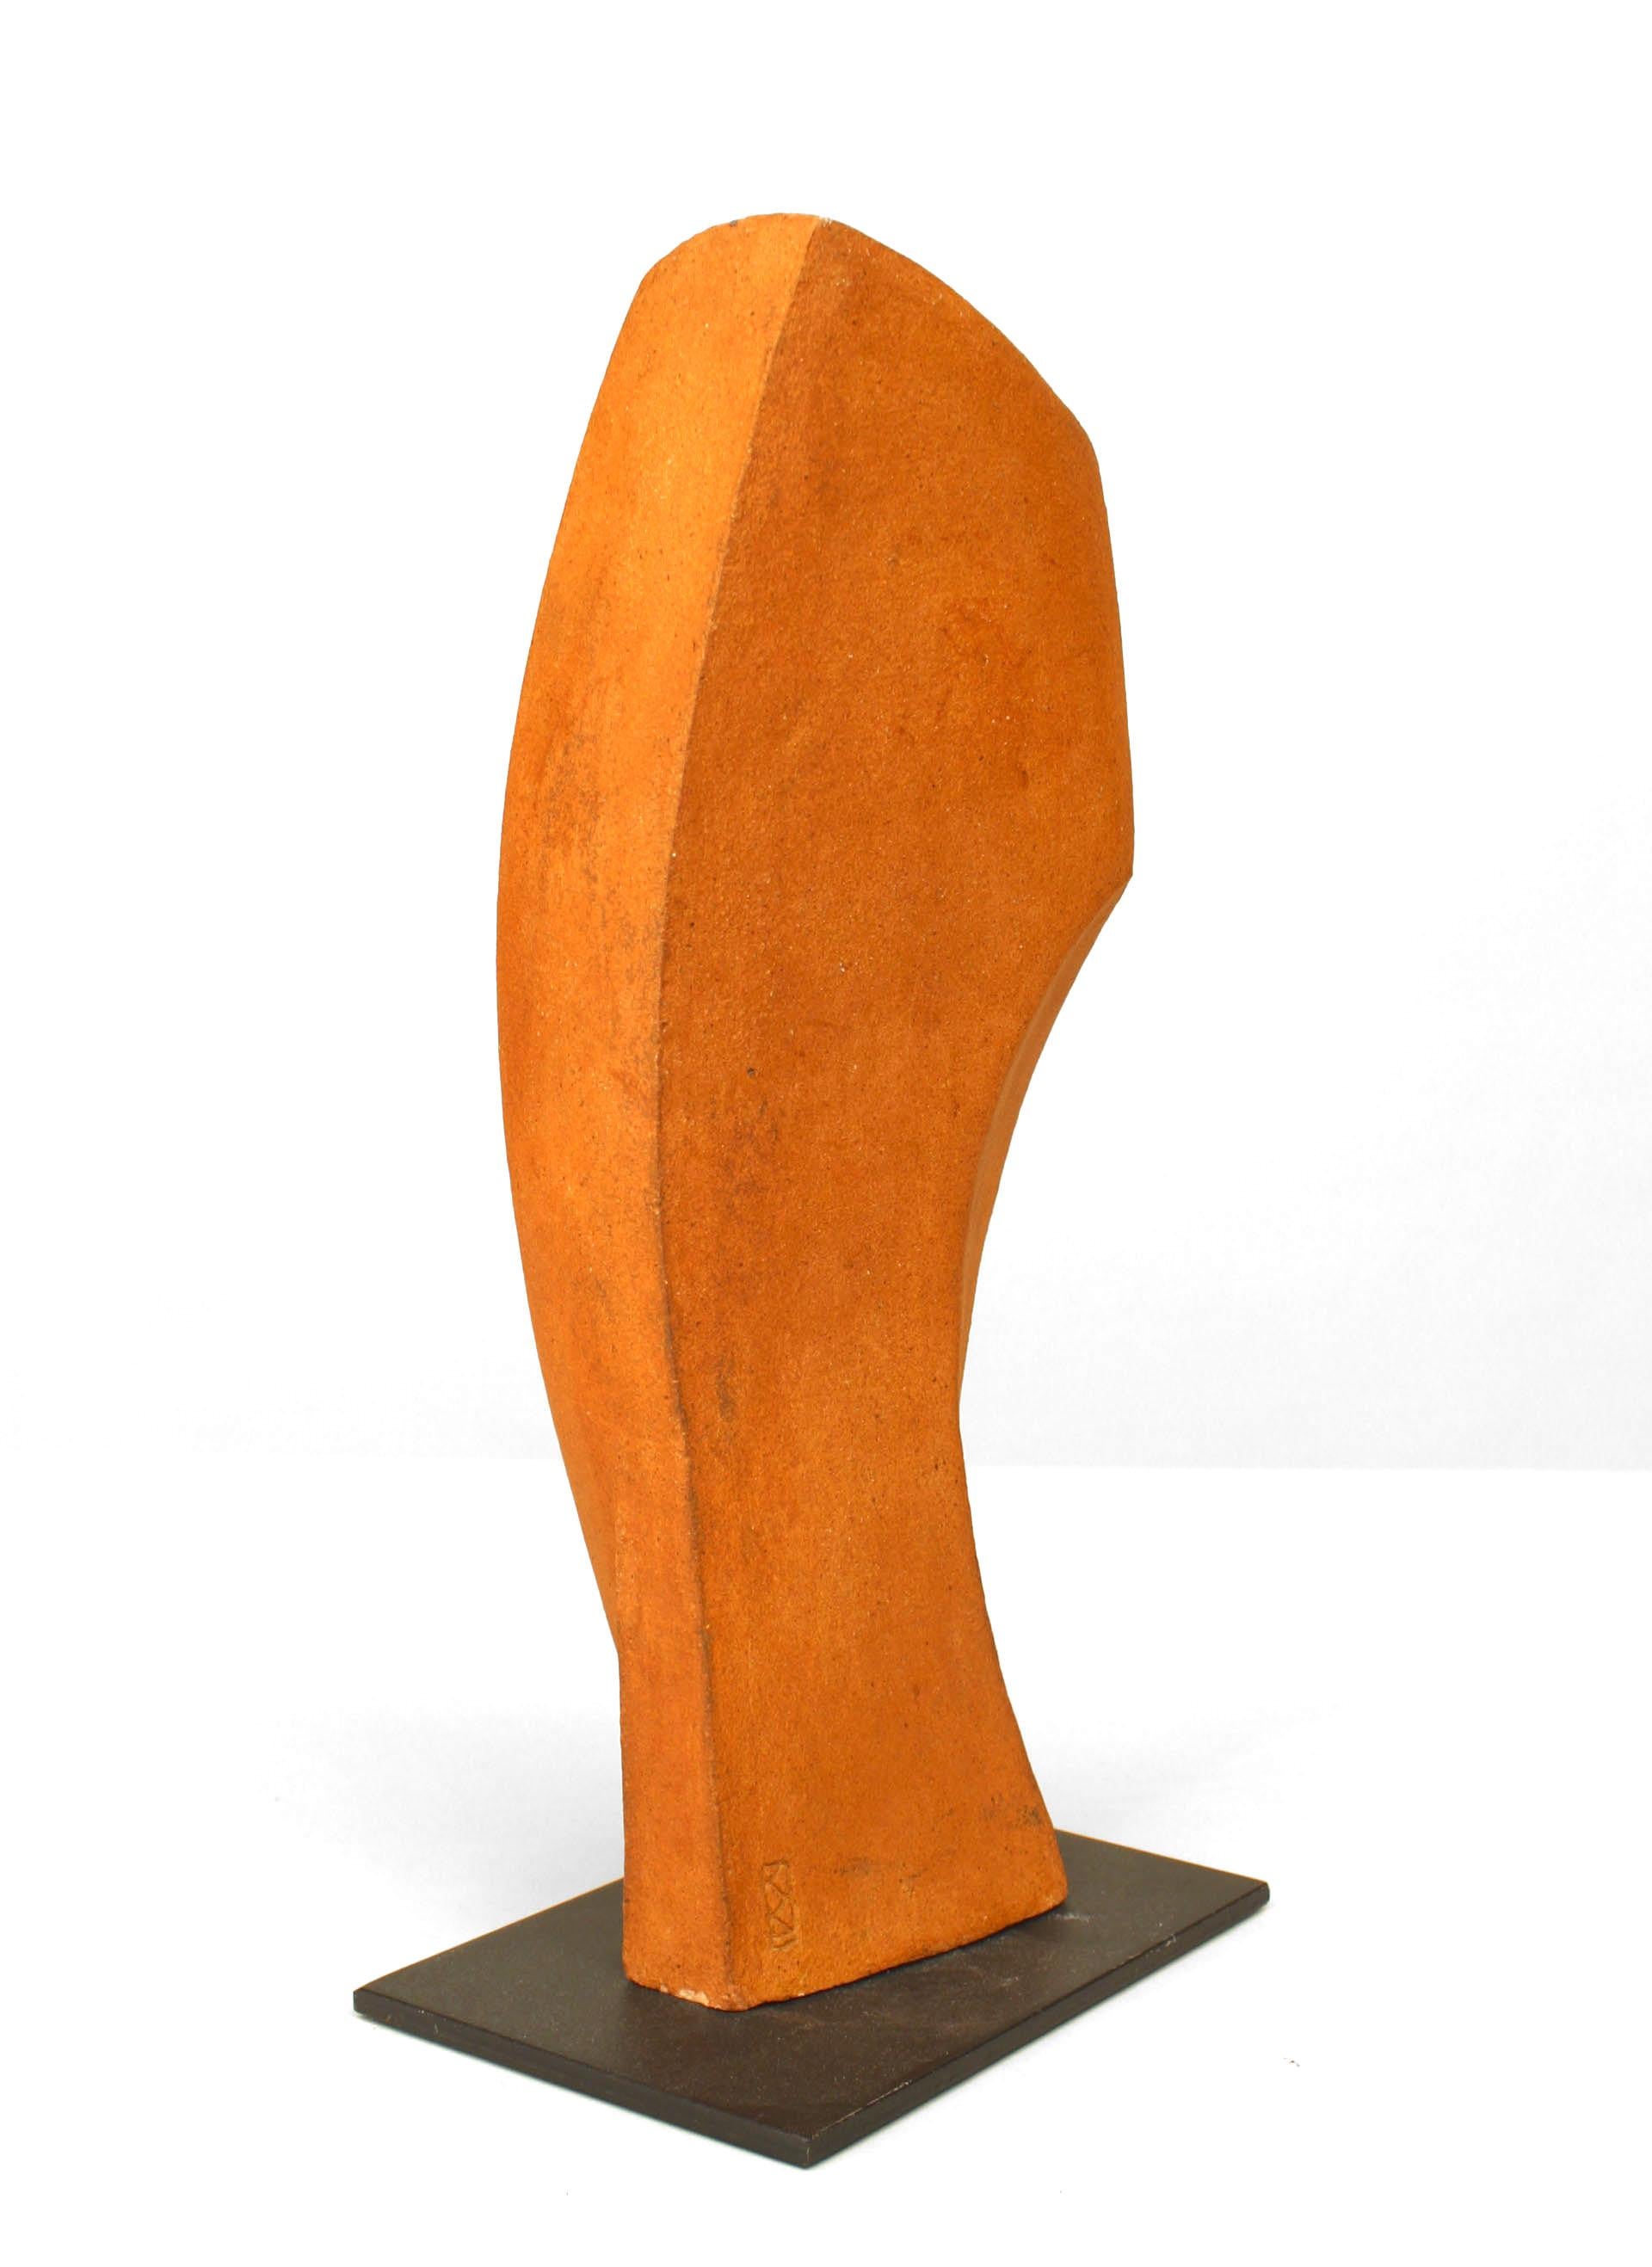 American Post-War Rust Ceramic Porcelain Sculpture In Good Condition For Sale In New York, NY